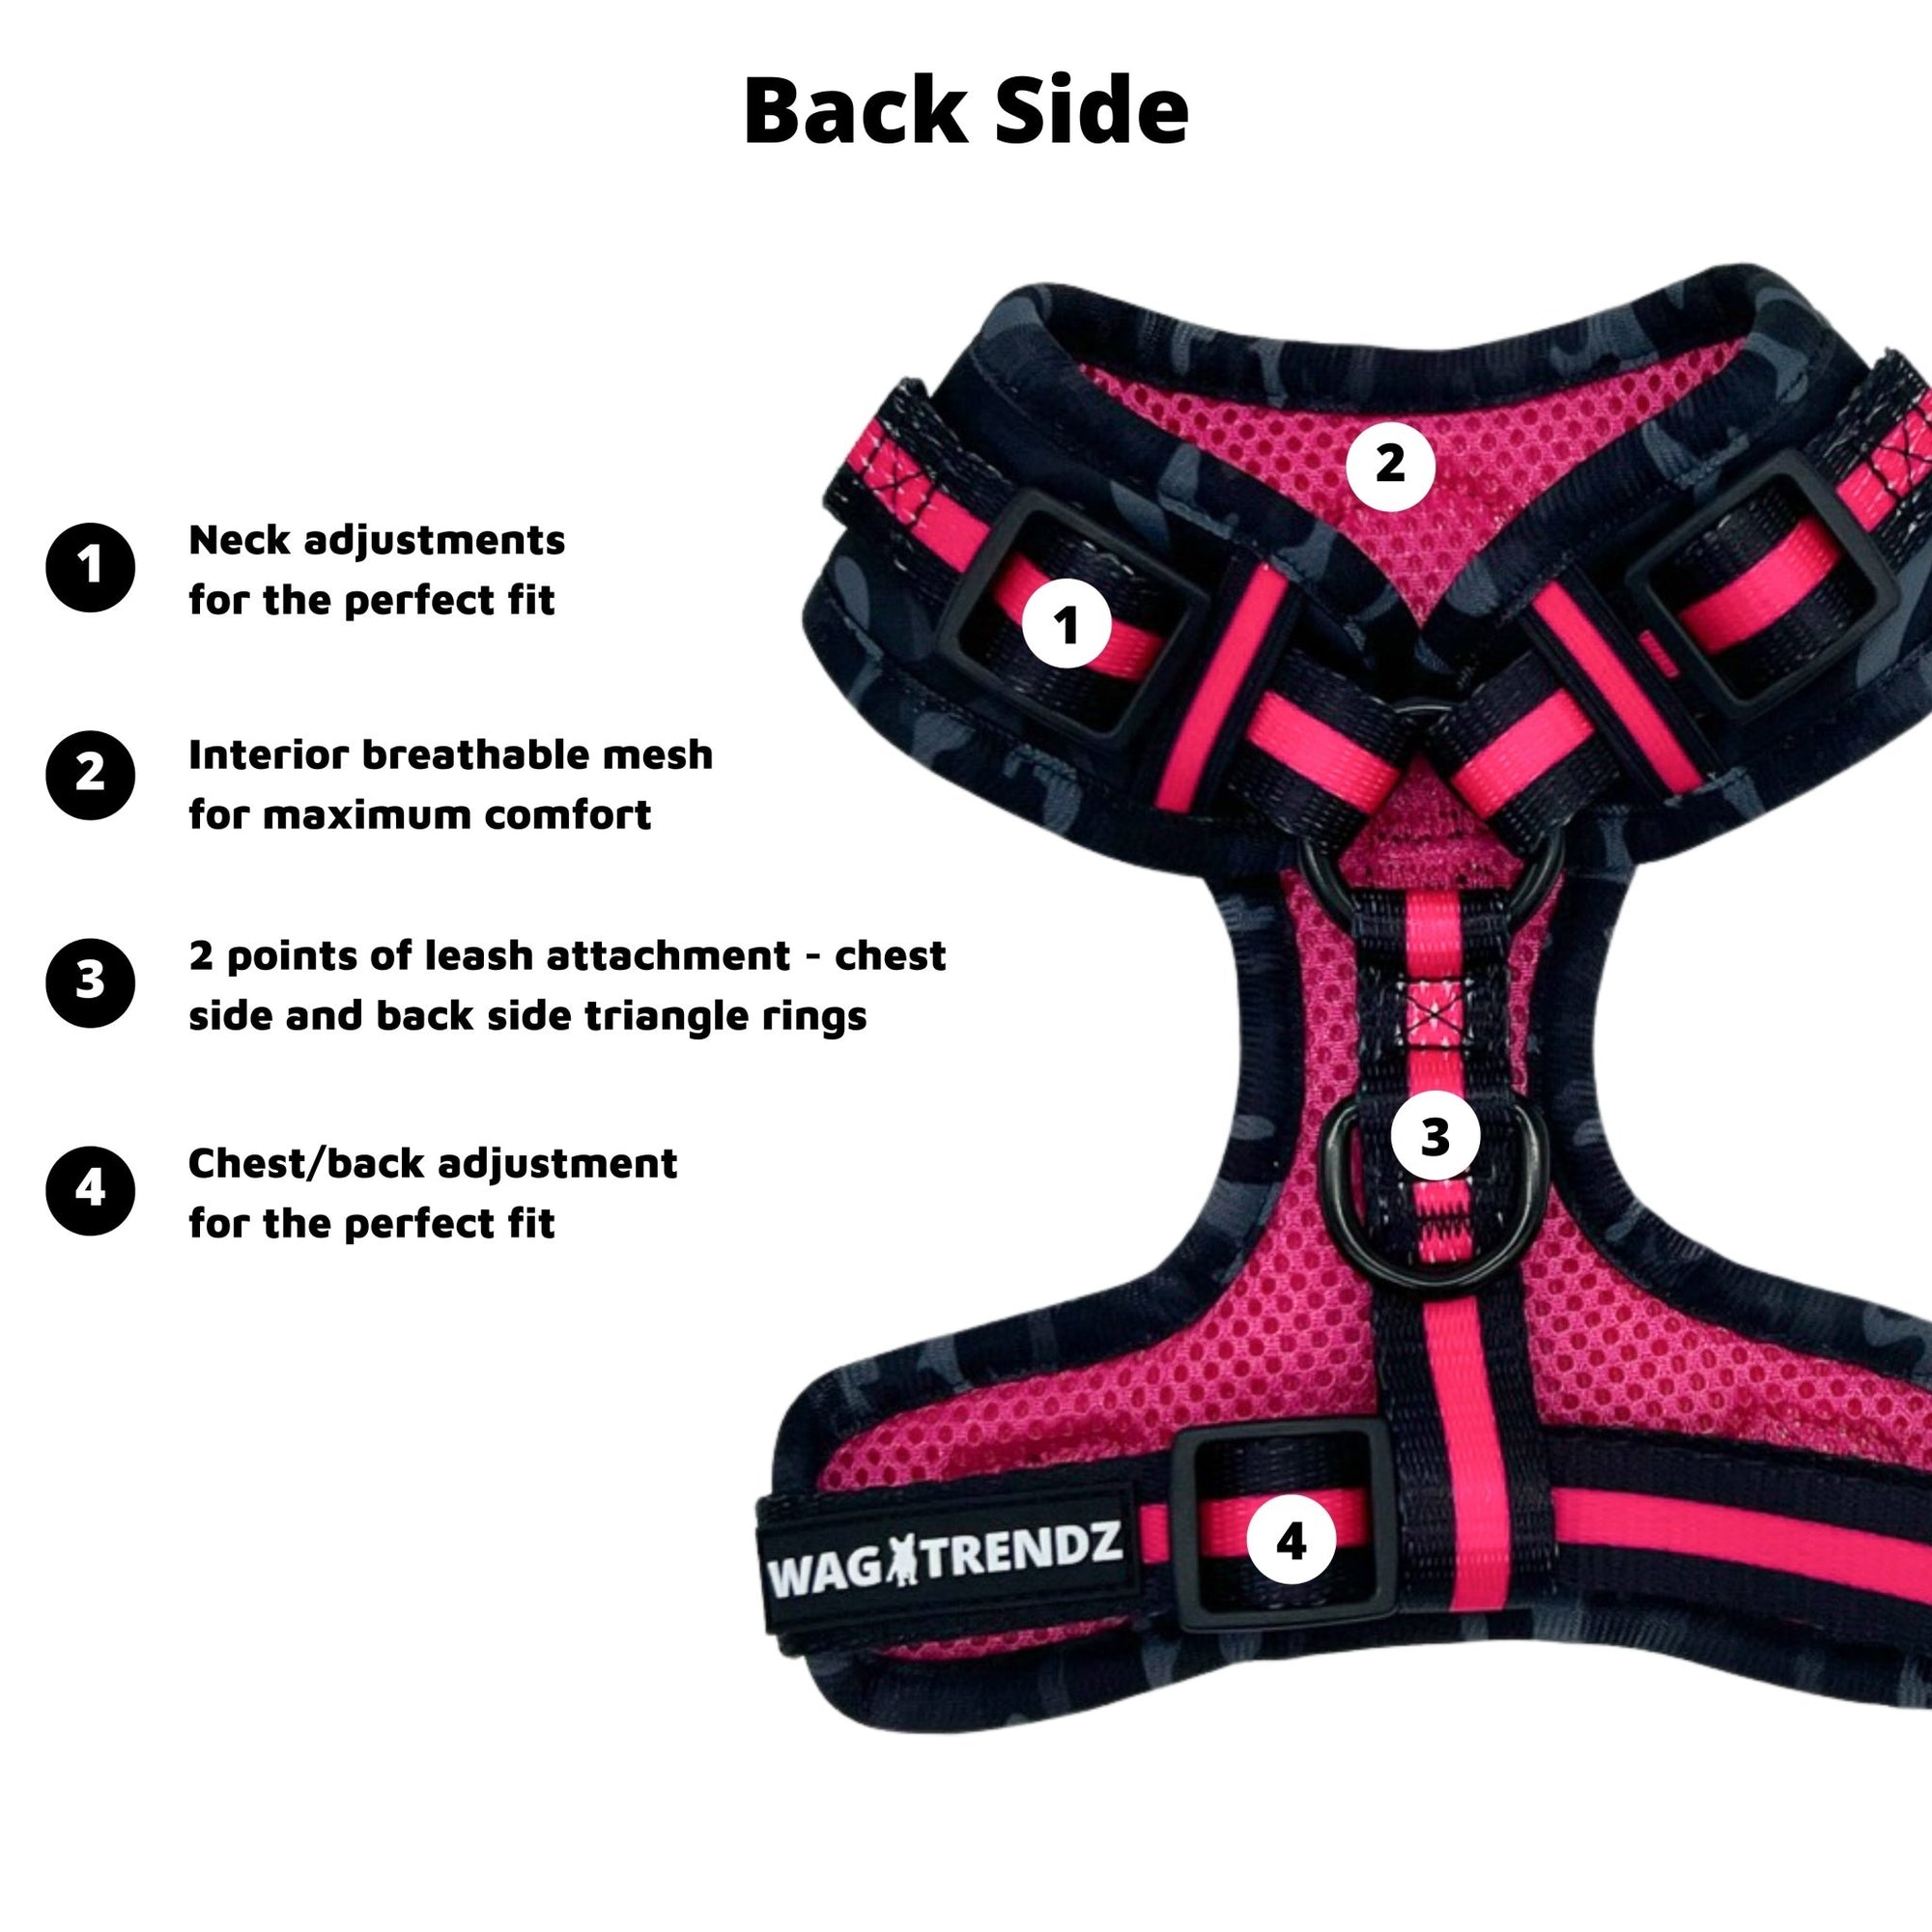 Dog Harness Vest - black and gray camo adjustable harness with hot pink accents - back view against a solid white background with product feature captions - Wag Trendz